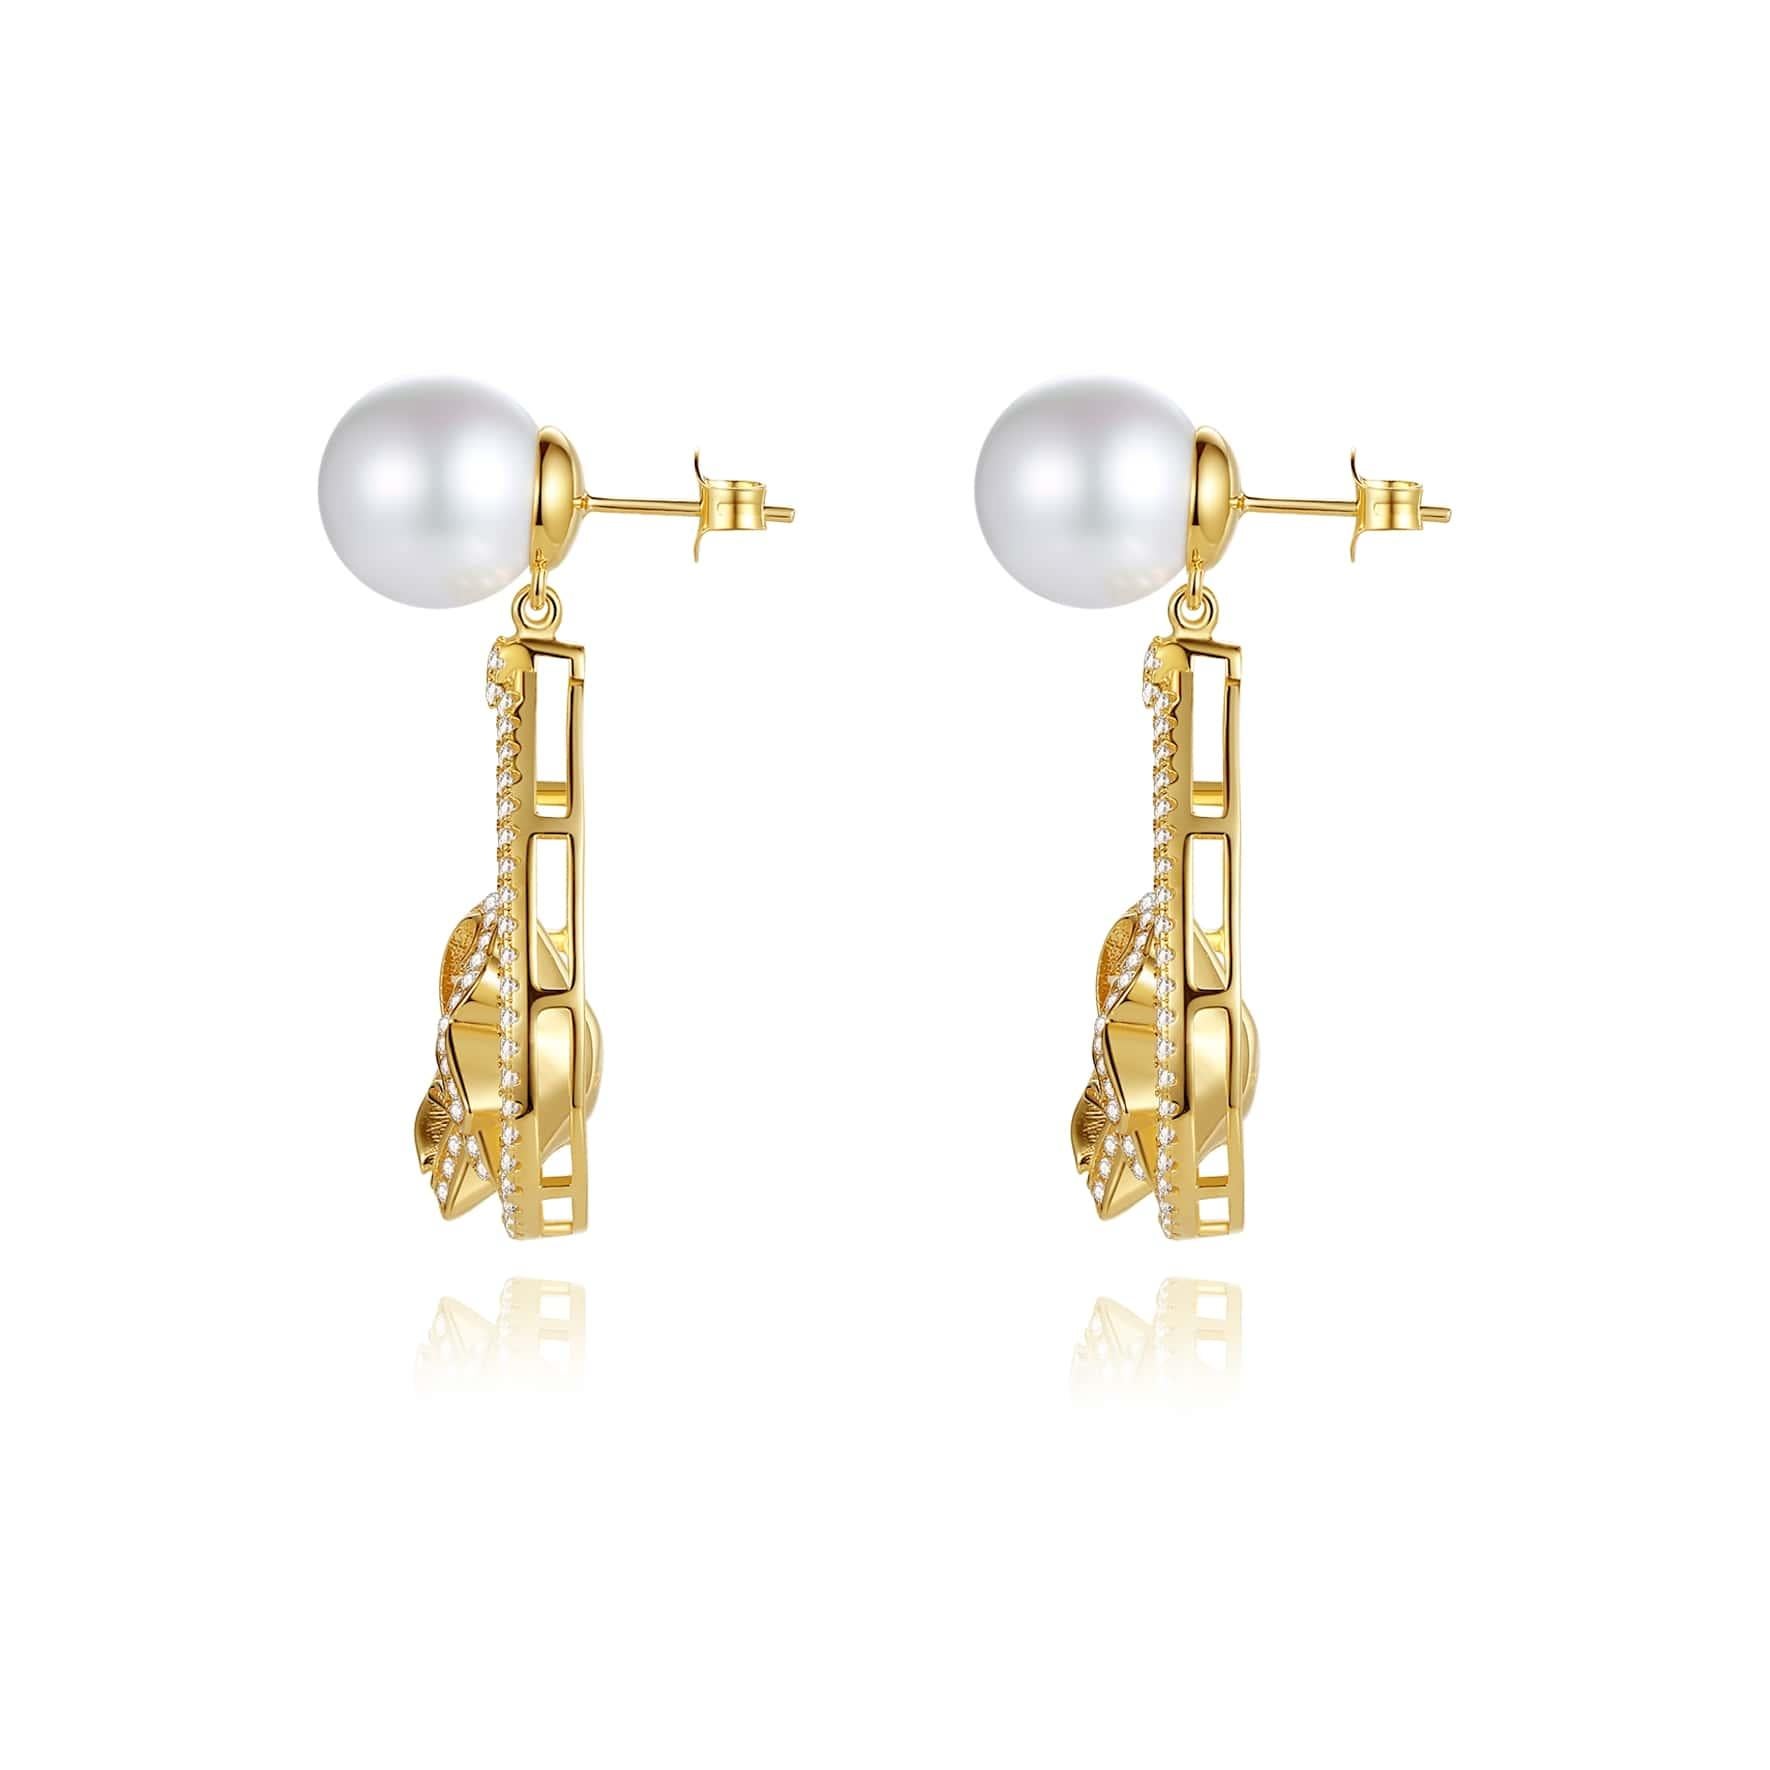 Brilliant Cut Quintessence Pearl with Flower Basket Earrings For Sale